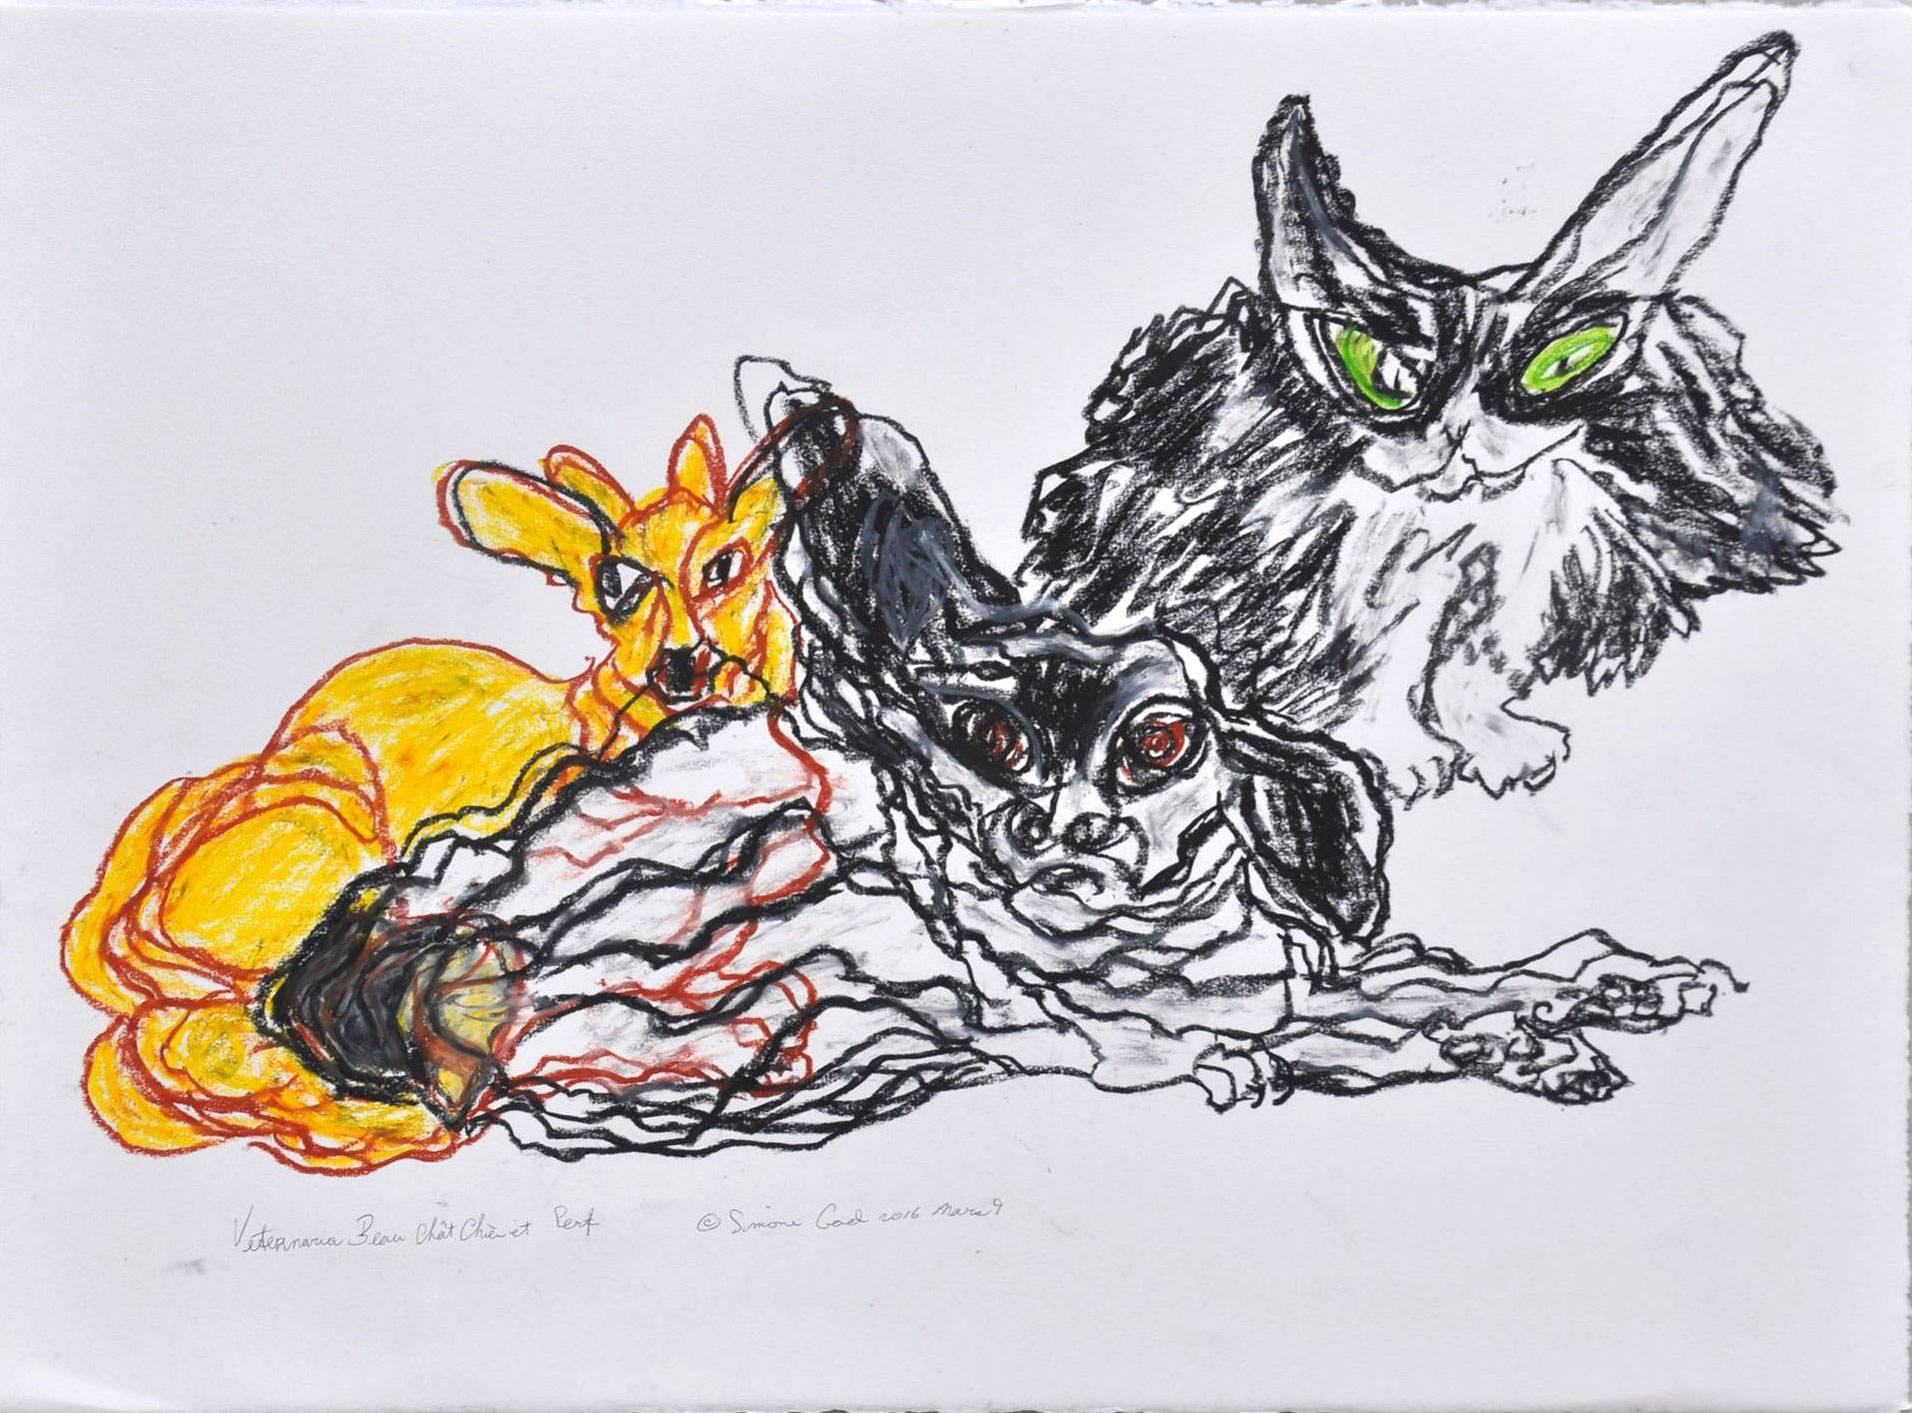 Simone Gad Abstract Drawing - Veterenia Chat Chien Et Cerf-Amis